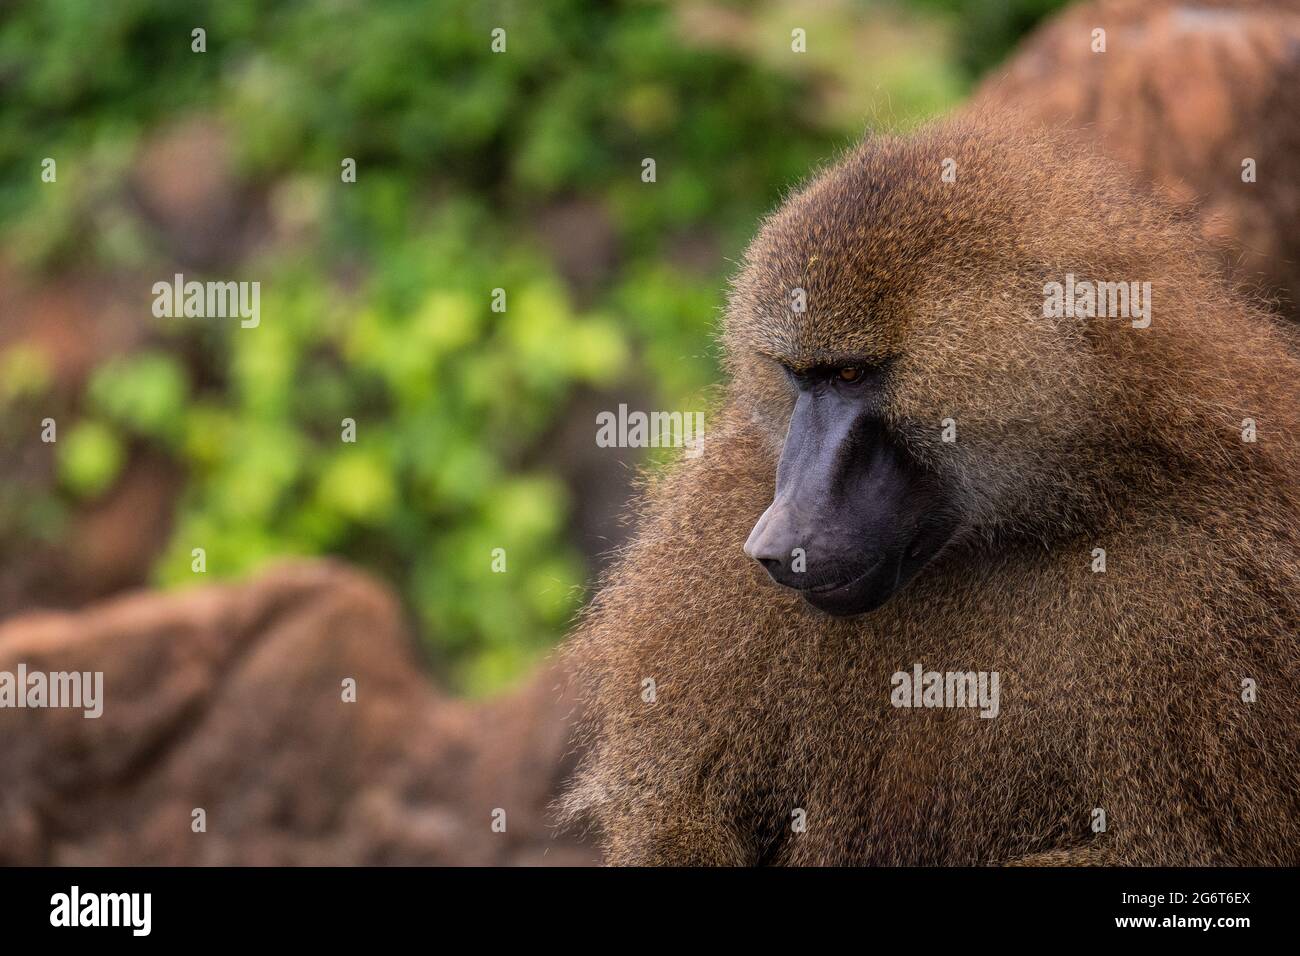 A Guinea baboon (Papio papio) in Cabarceno Nature Park. The Cabarceno Nature Park is not a conventional zoo. It is an area of 750 hectares that houses Stock Photo